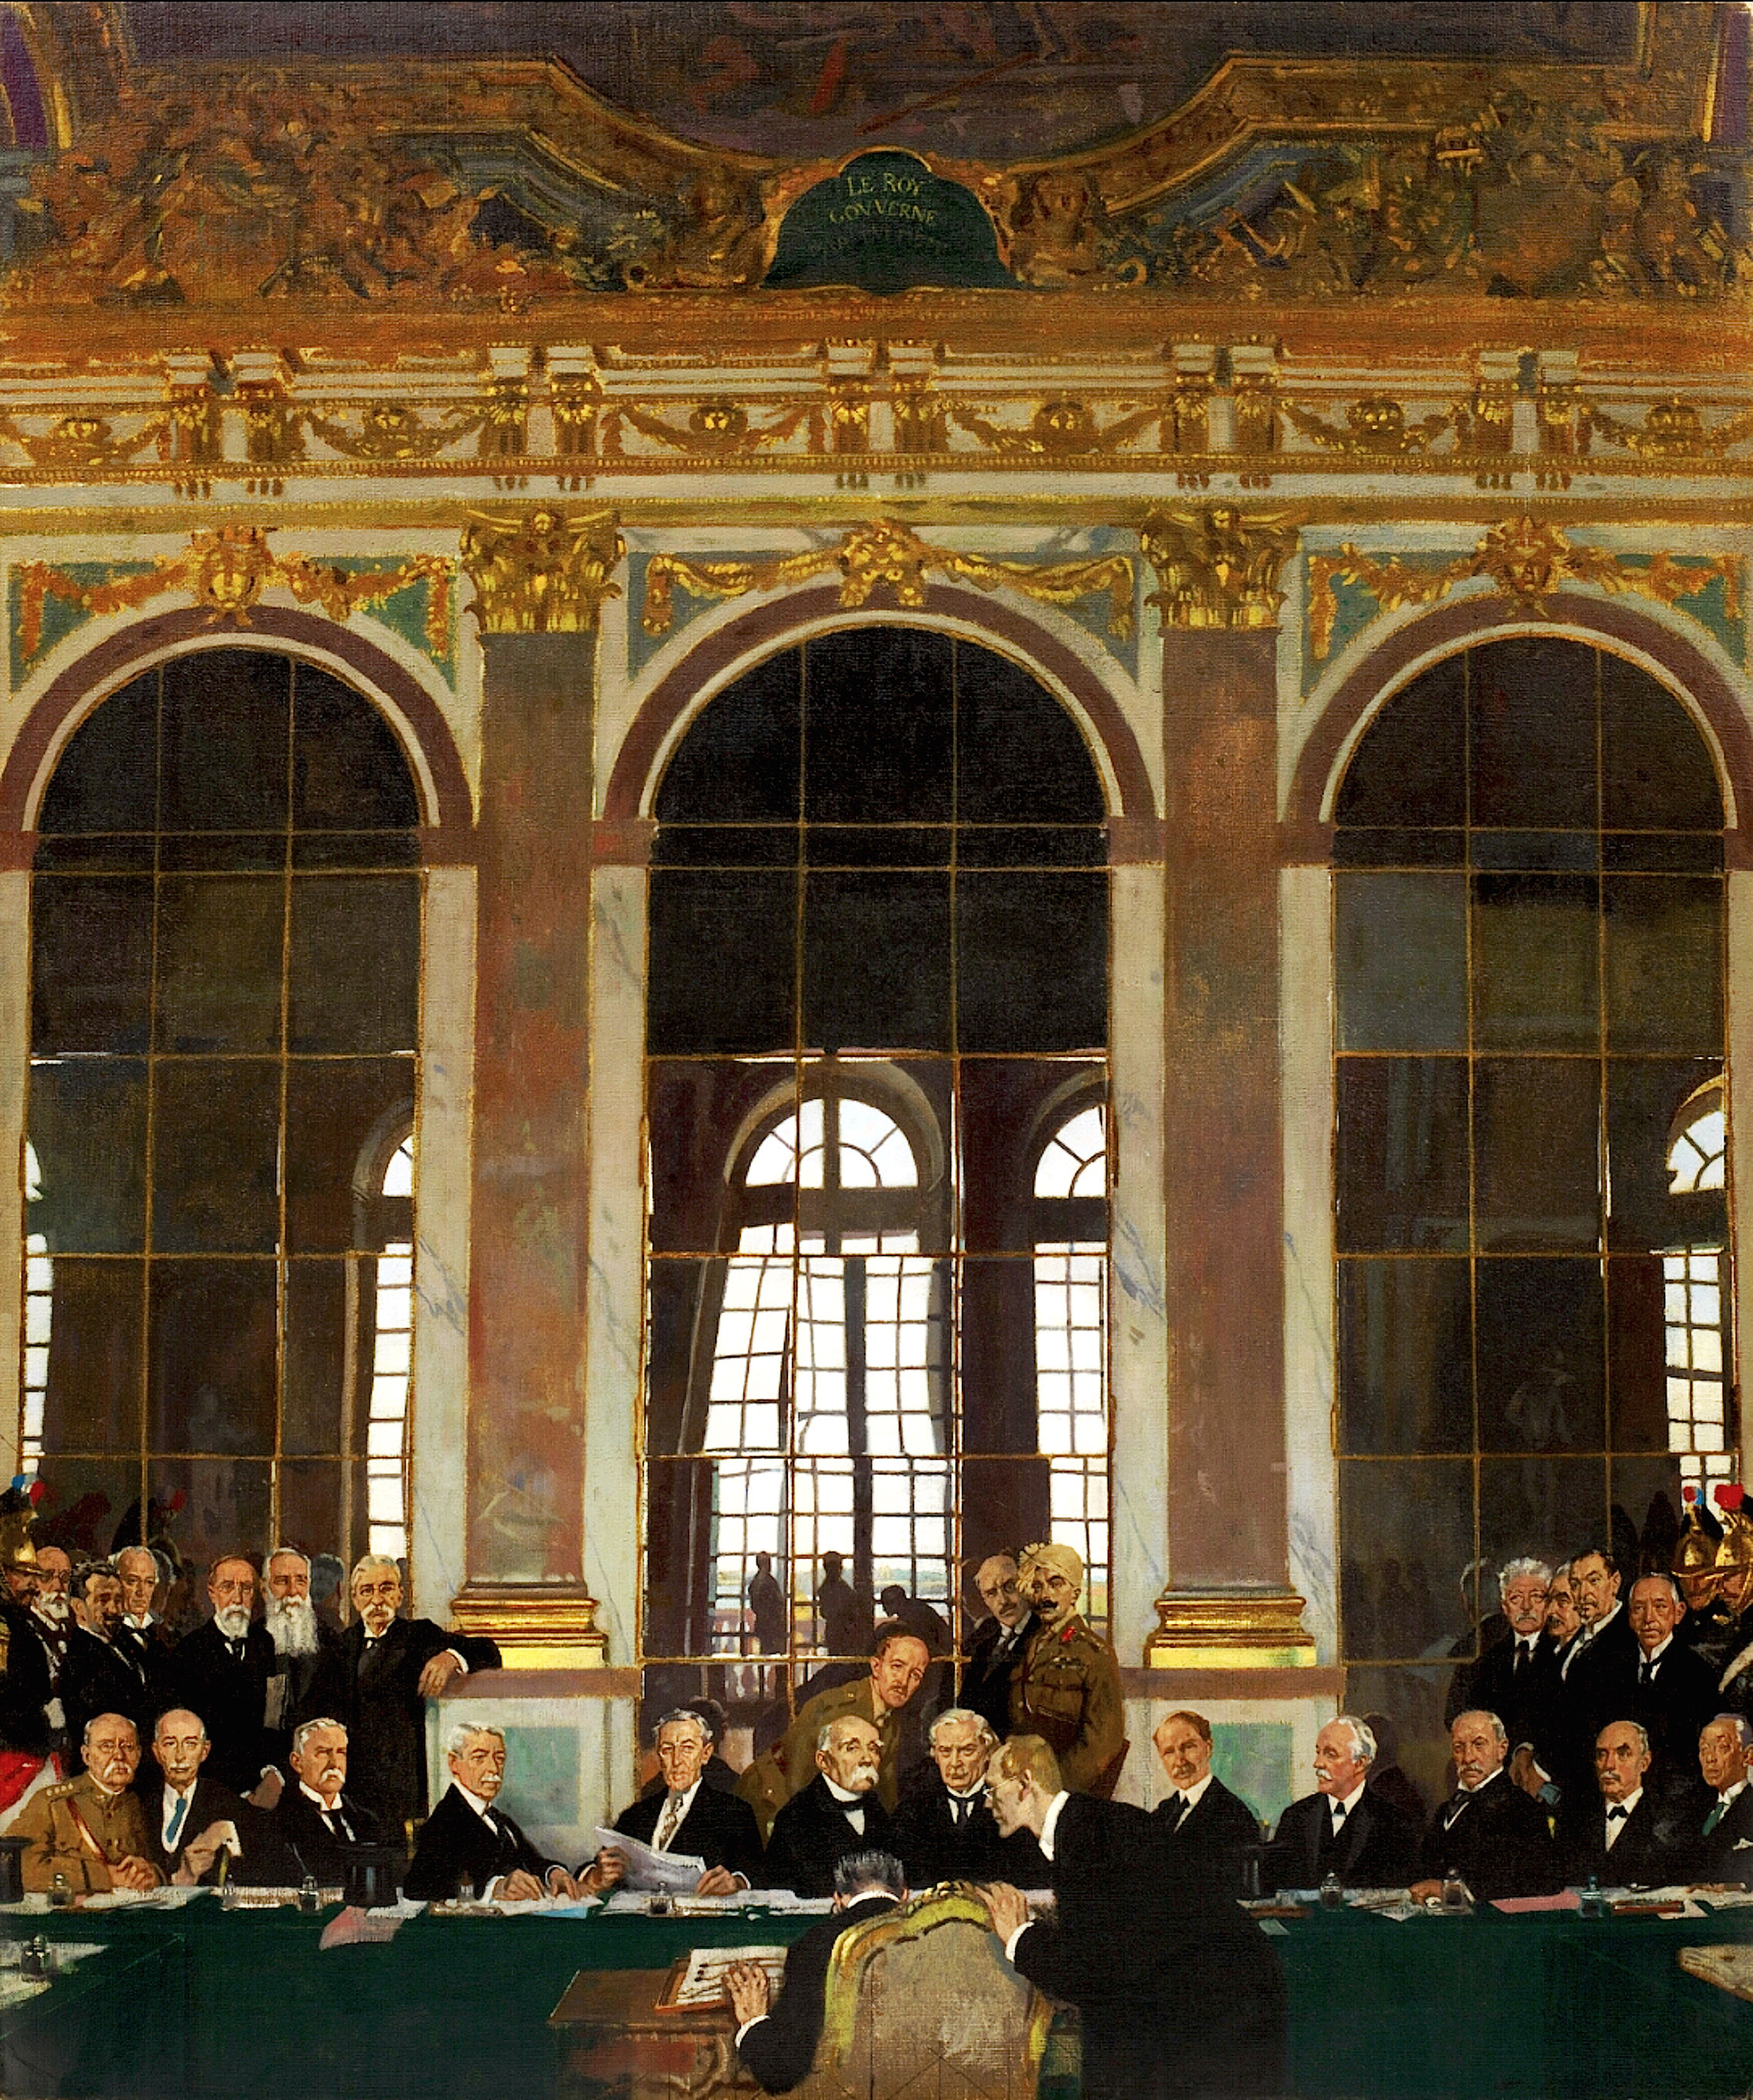 Signing of the Treaty of Versailles in 1919 image - Free stock photo ...